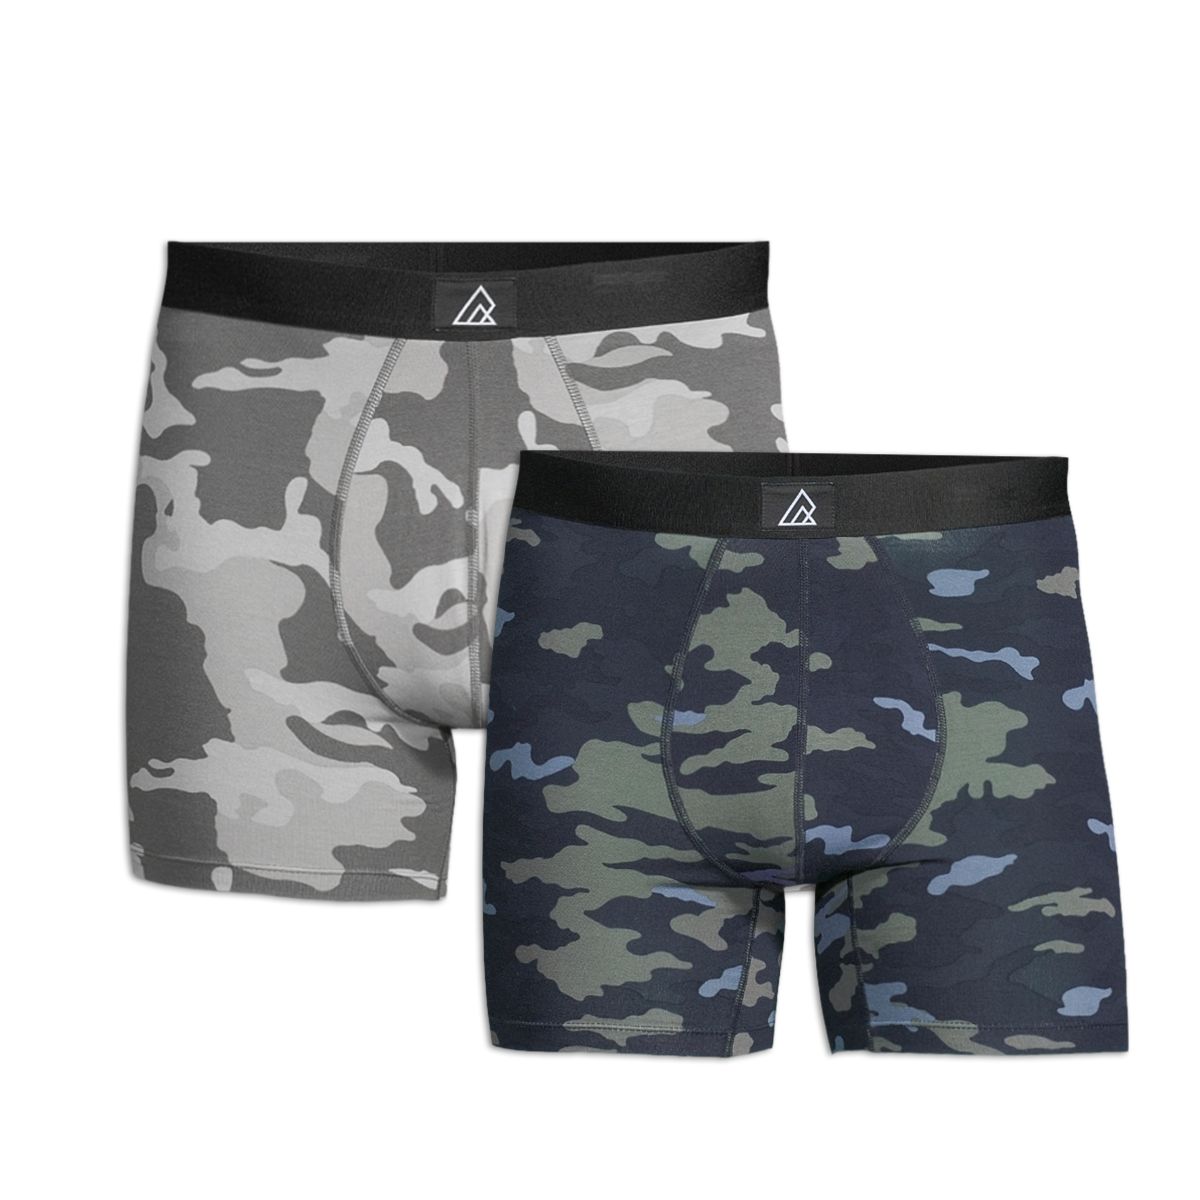 Ripzone Men's Freestyle All Over Print Boxer Brief - 2 Pack